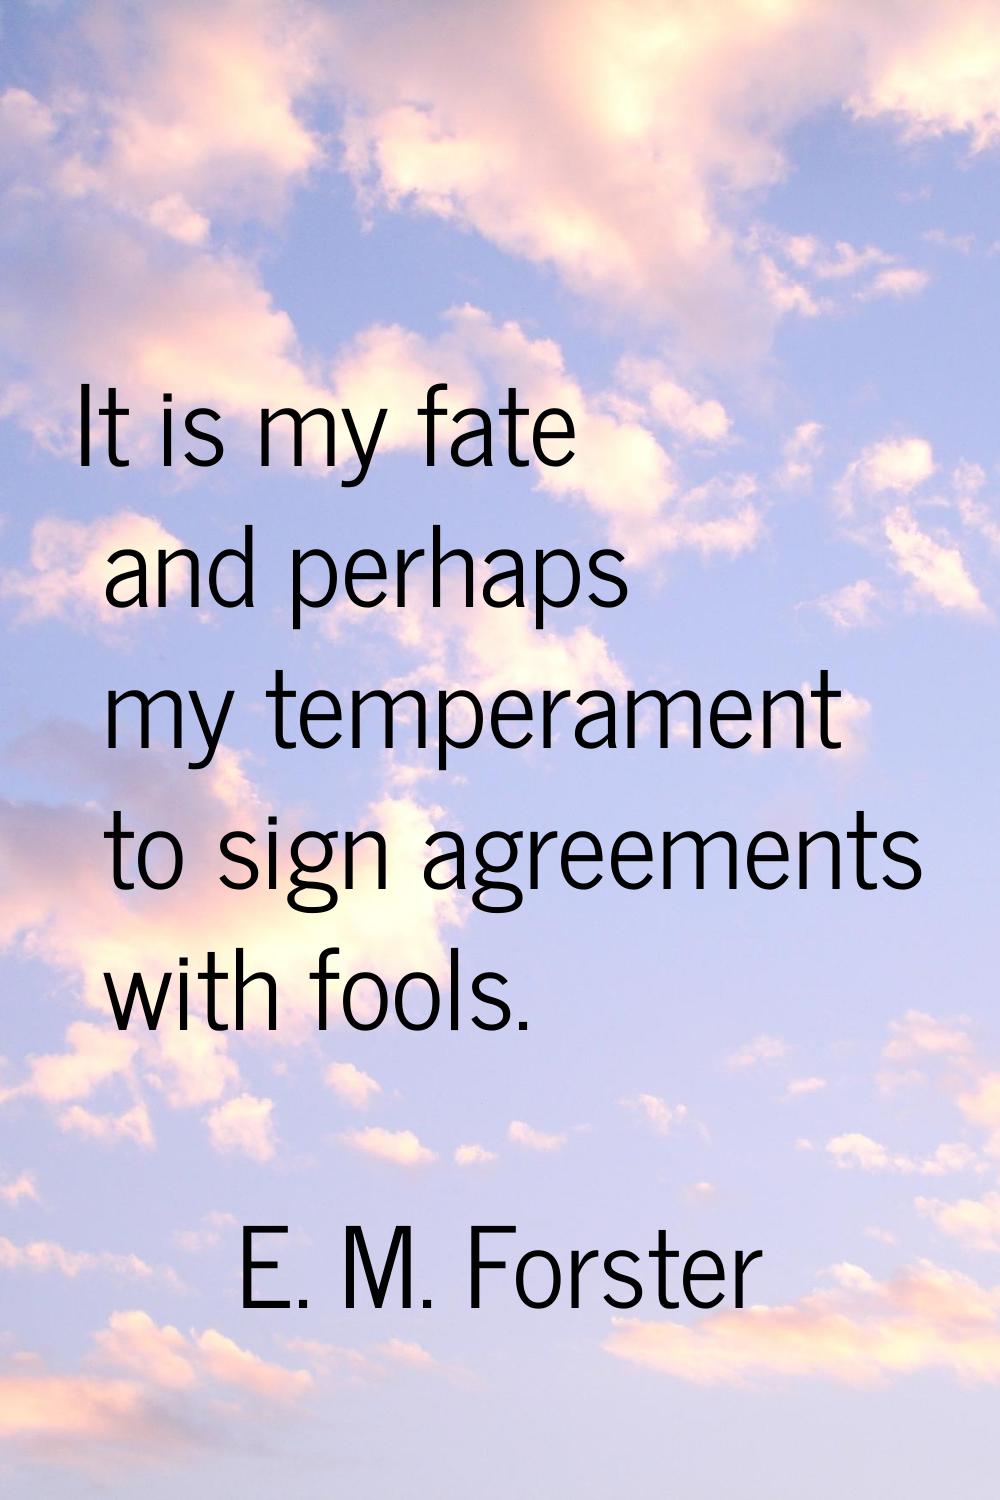 It is my fate and perhaps my temperament to sign agreements with fools.